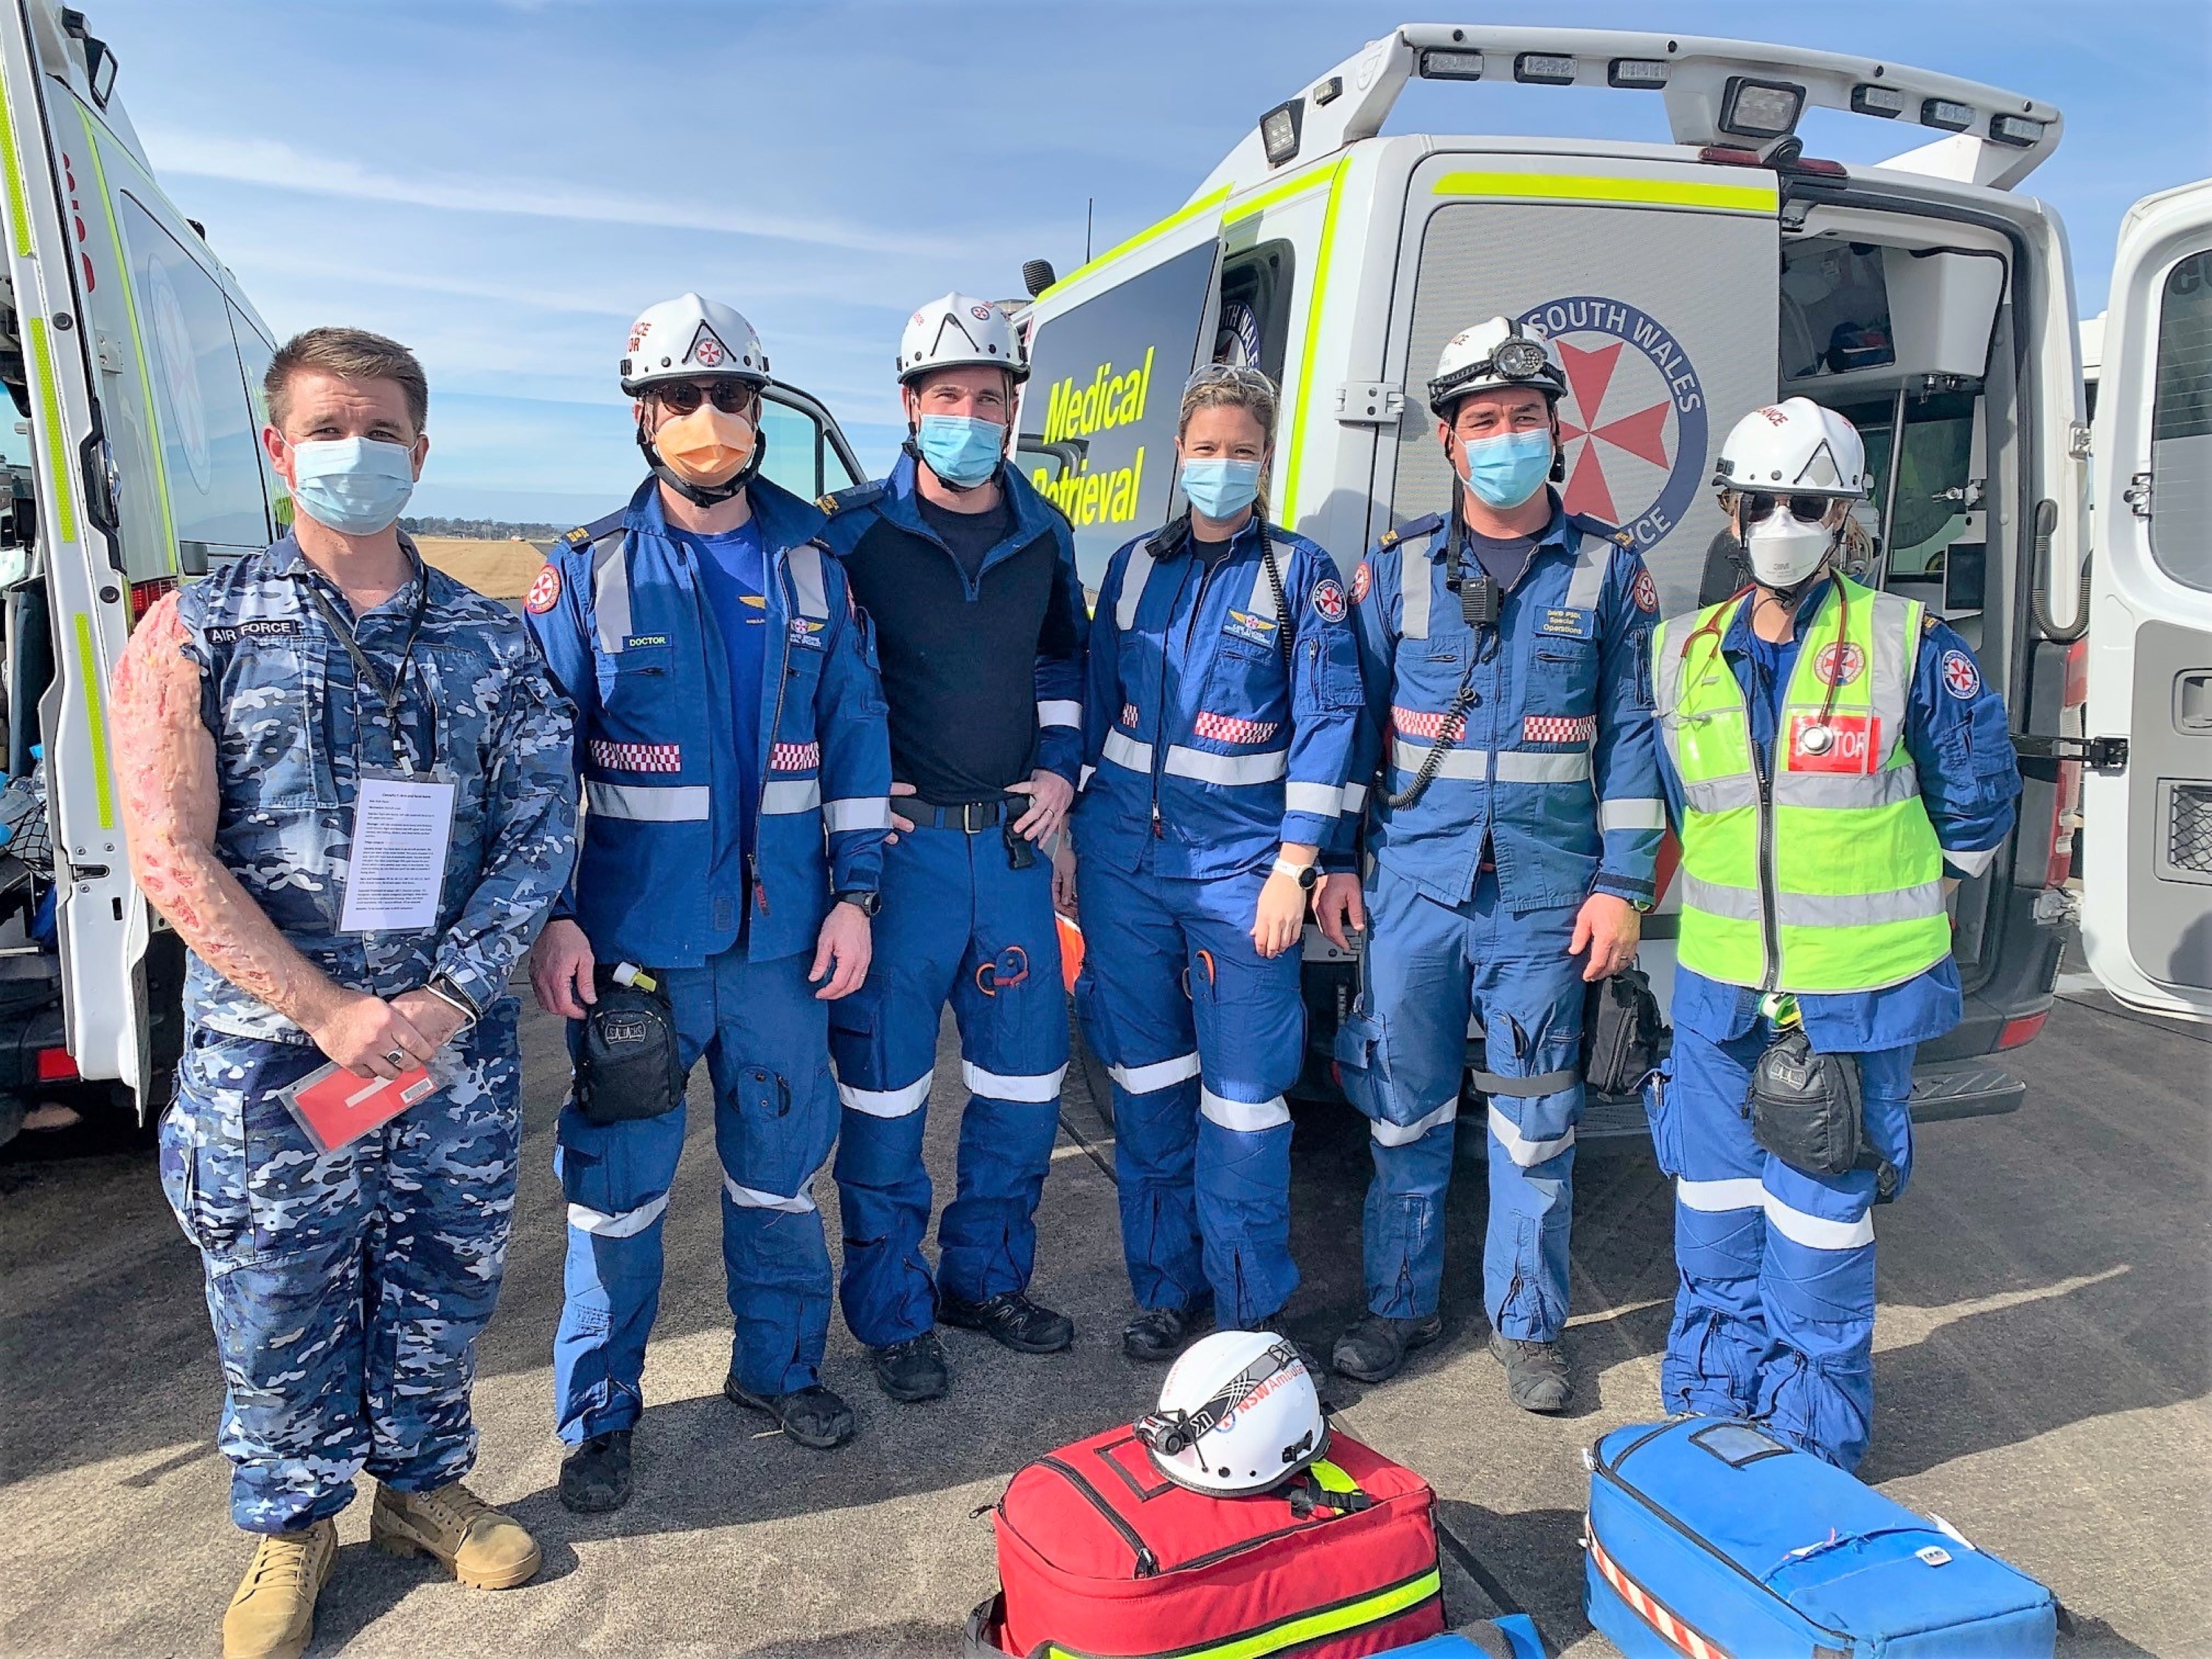 NSW Ambulance doctors and aeromedical staff posing for a group photo with an RAAF member in moulage at the multi-agency mass casualty exercise in June 2022.